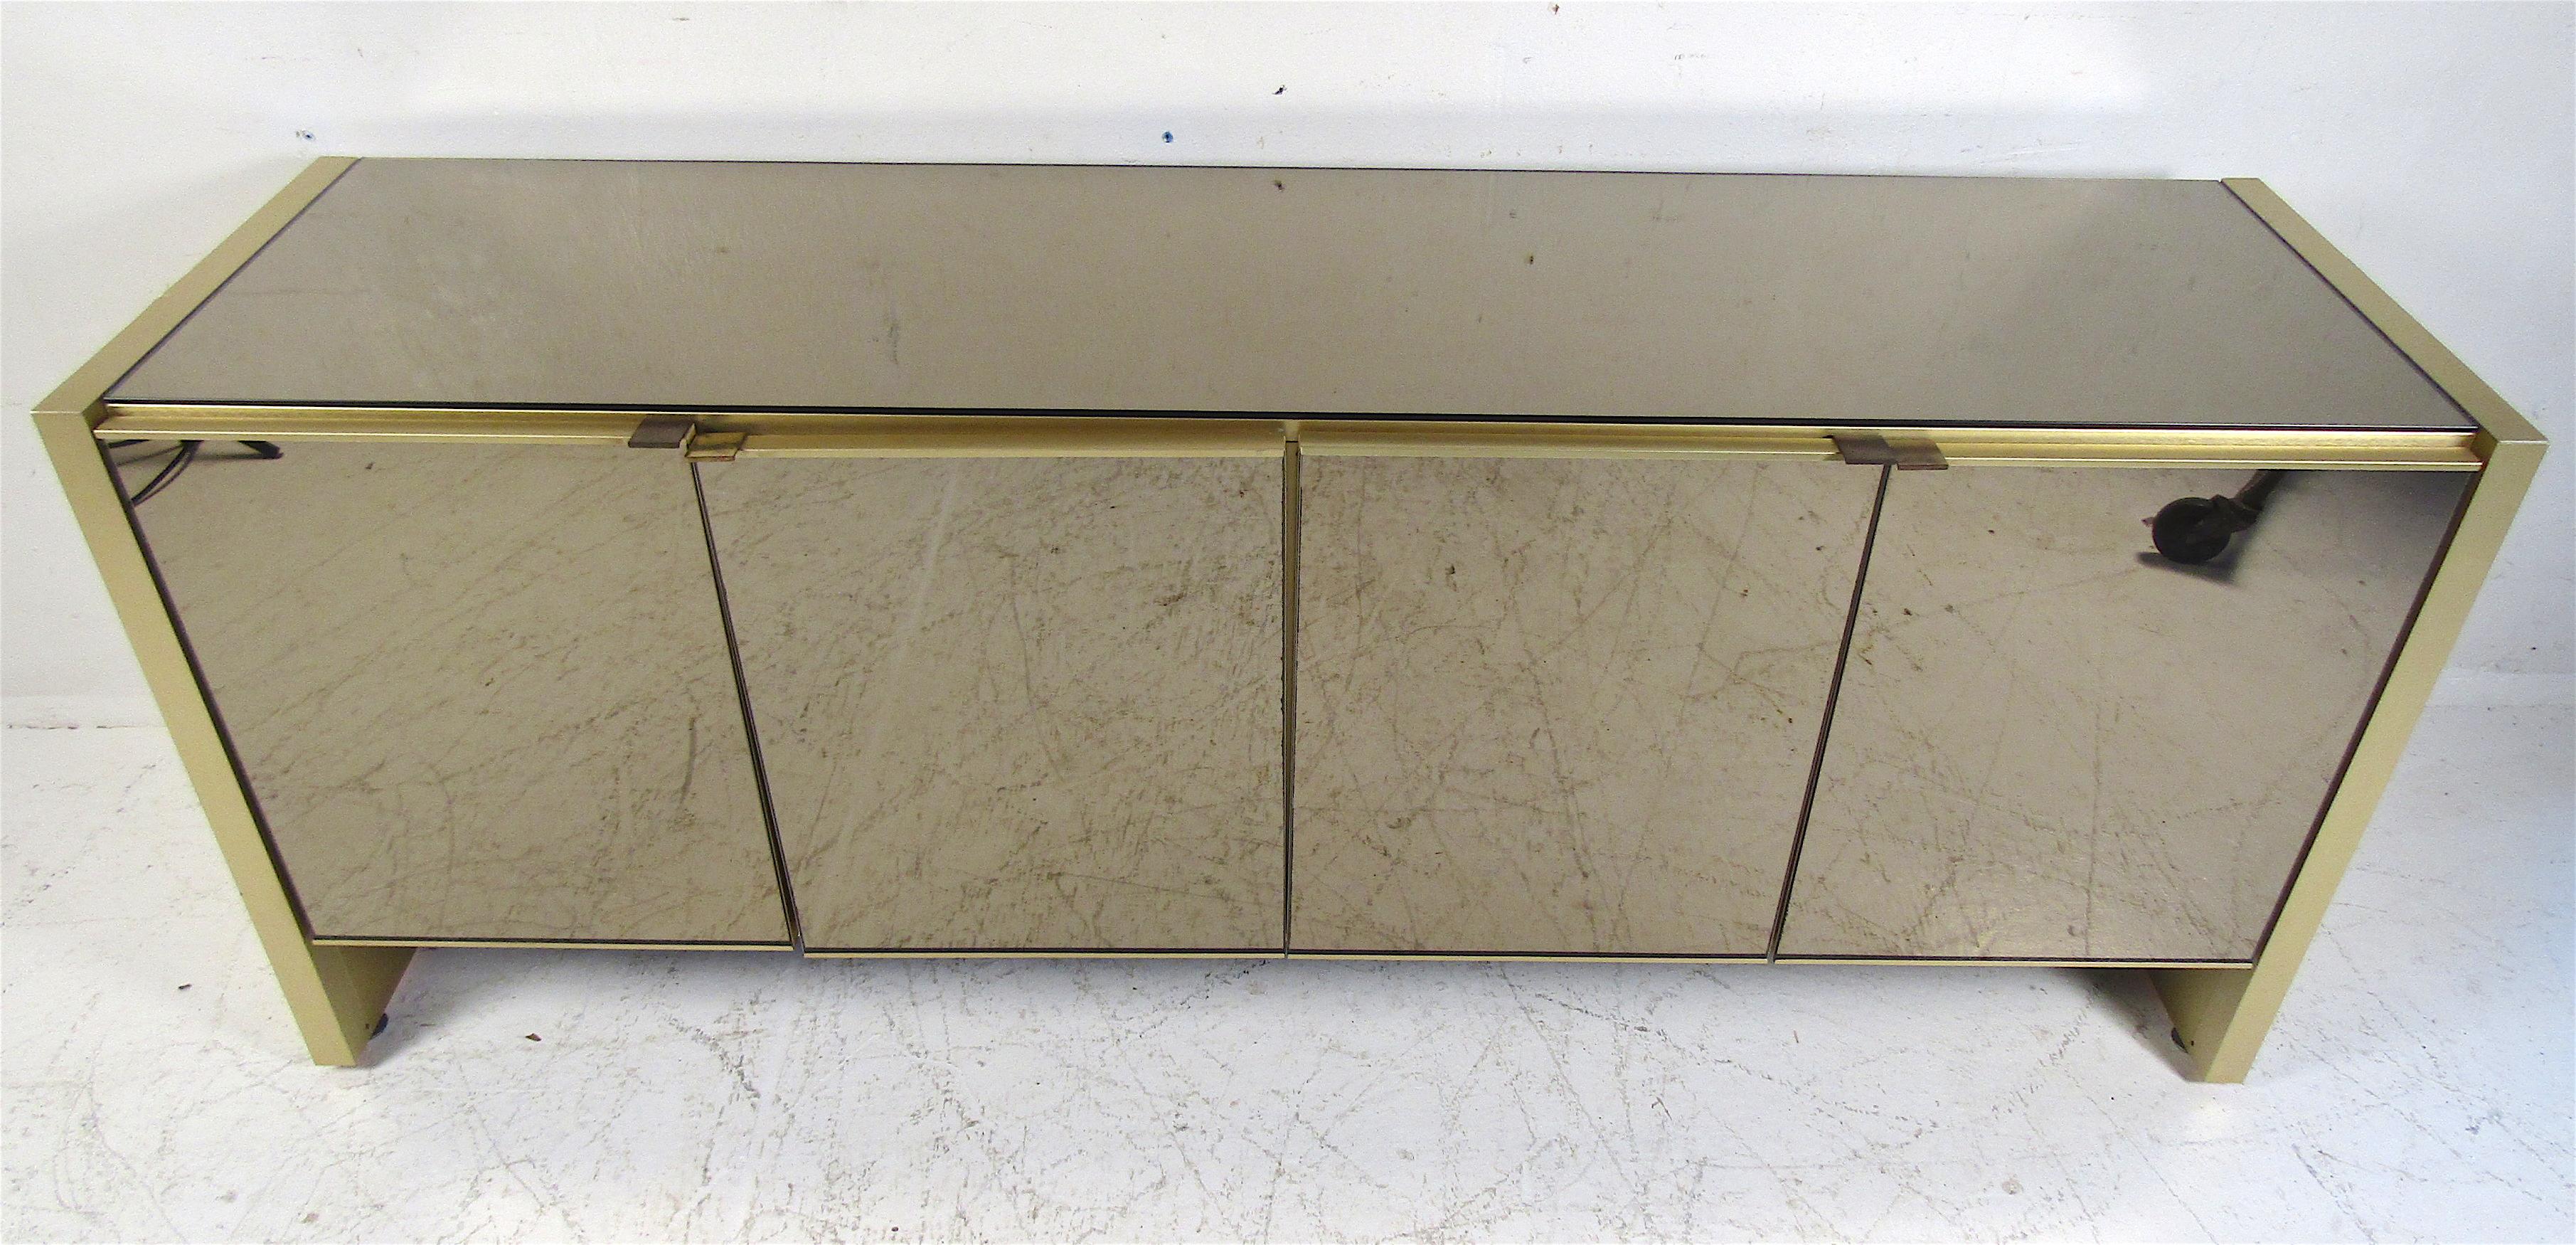 This stunning vintage modern credenza features ample room behind its four cabinet doors. A mirrored front and top makes this a unique addition to any home, business, or office. Please confirm item location (NY or NJ).